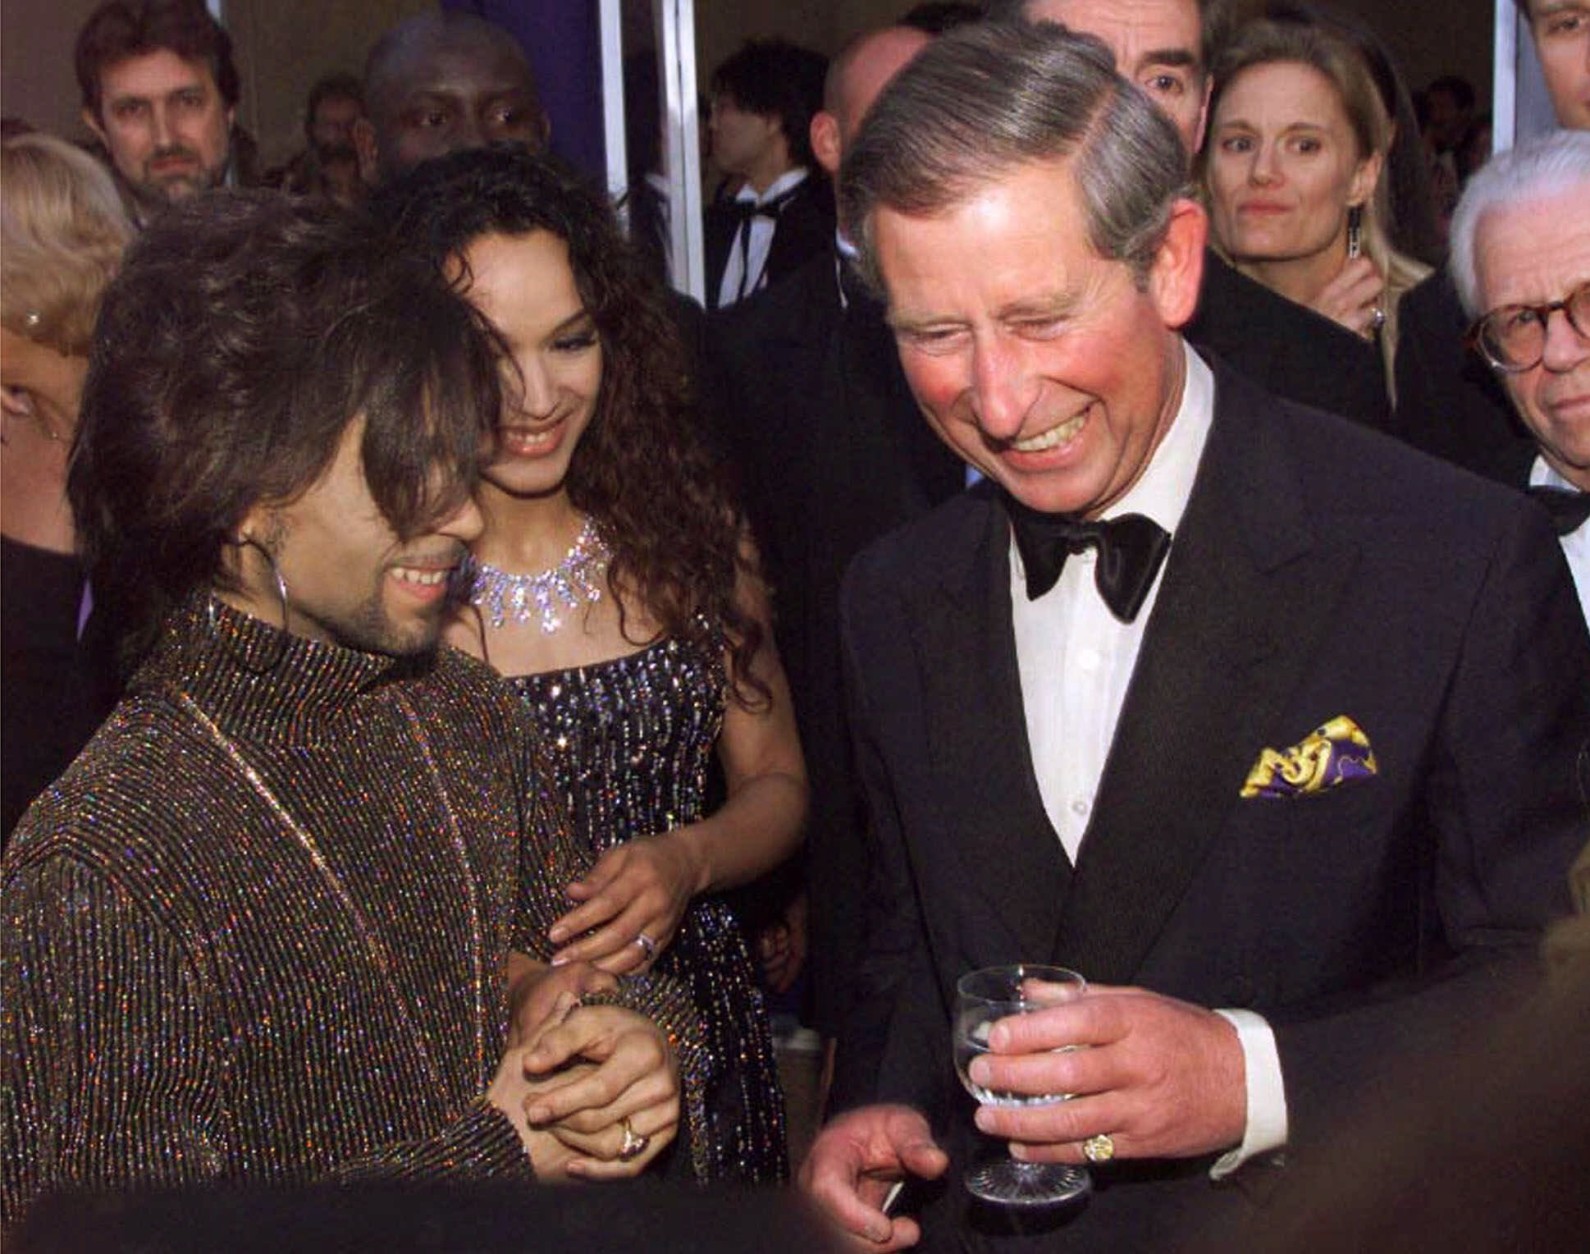 Britain's Prince Charles talks with The Artist, formerly known as Prince, left, at the "Diamonds are Forever" celebration at Syon House, London Wednesday, June 9, 1999. The celebration was to include the unveiling of a multi-million dollar diamond jewelry collection, the first-ever Versace fashion show in Britain and a live performance by Jon Bon Jovi.  The Artist's wife Mayte is at center. (AP Photo/Dave Hogan/pool)